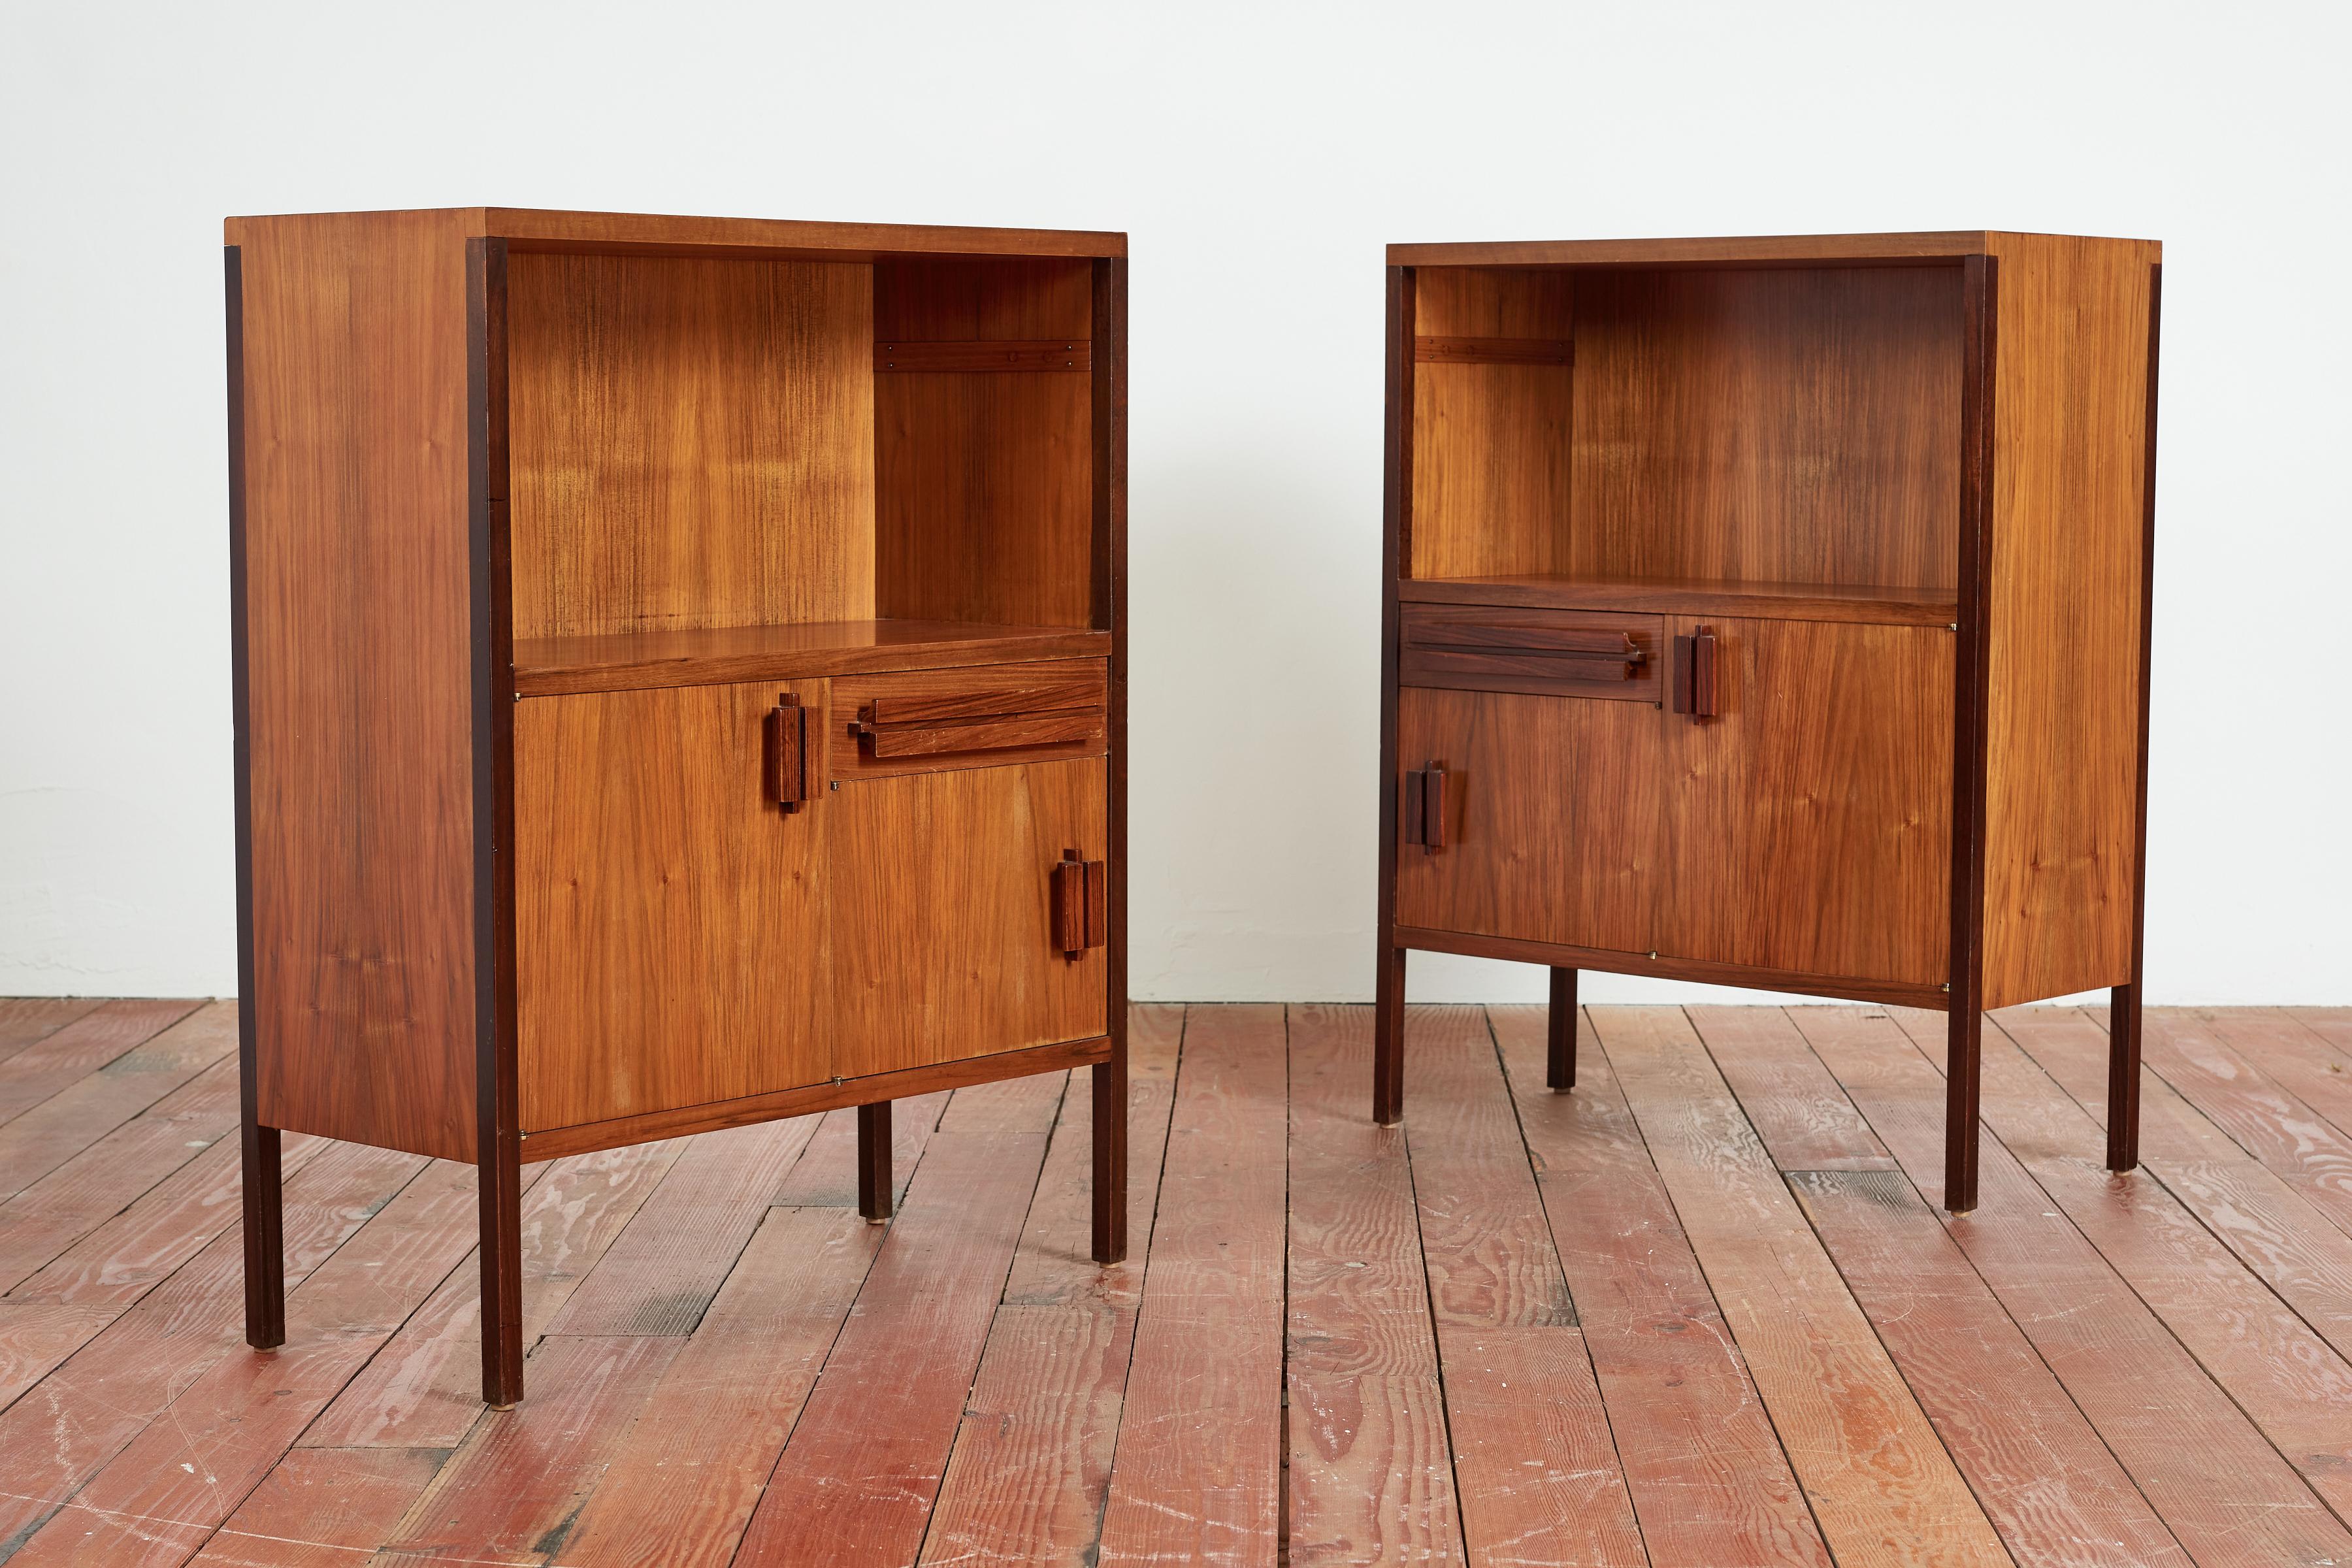 Pair of Wooden bedside tables Positano model. Designed by Ico Parisi for manifattura MIM Roma. 
Italy, 1950s
Beautiful patina to wood.
Each bedside table has a shelf, two open compartments with hinged doors and a drawer for storage. 
Original dark